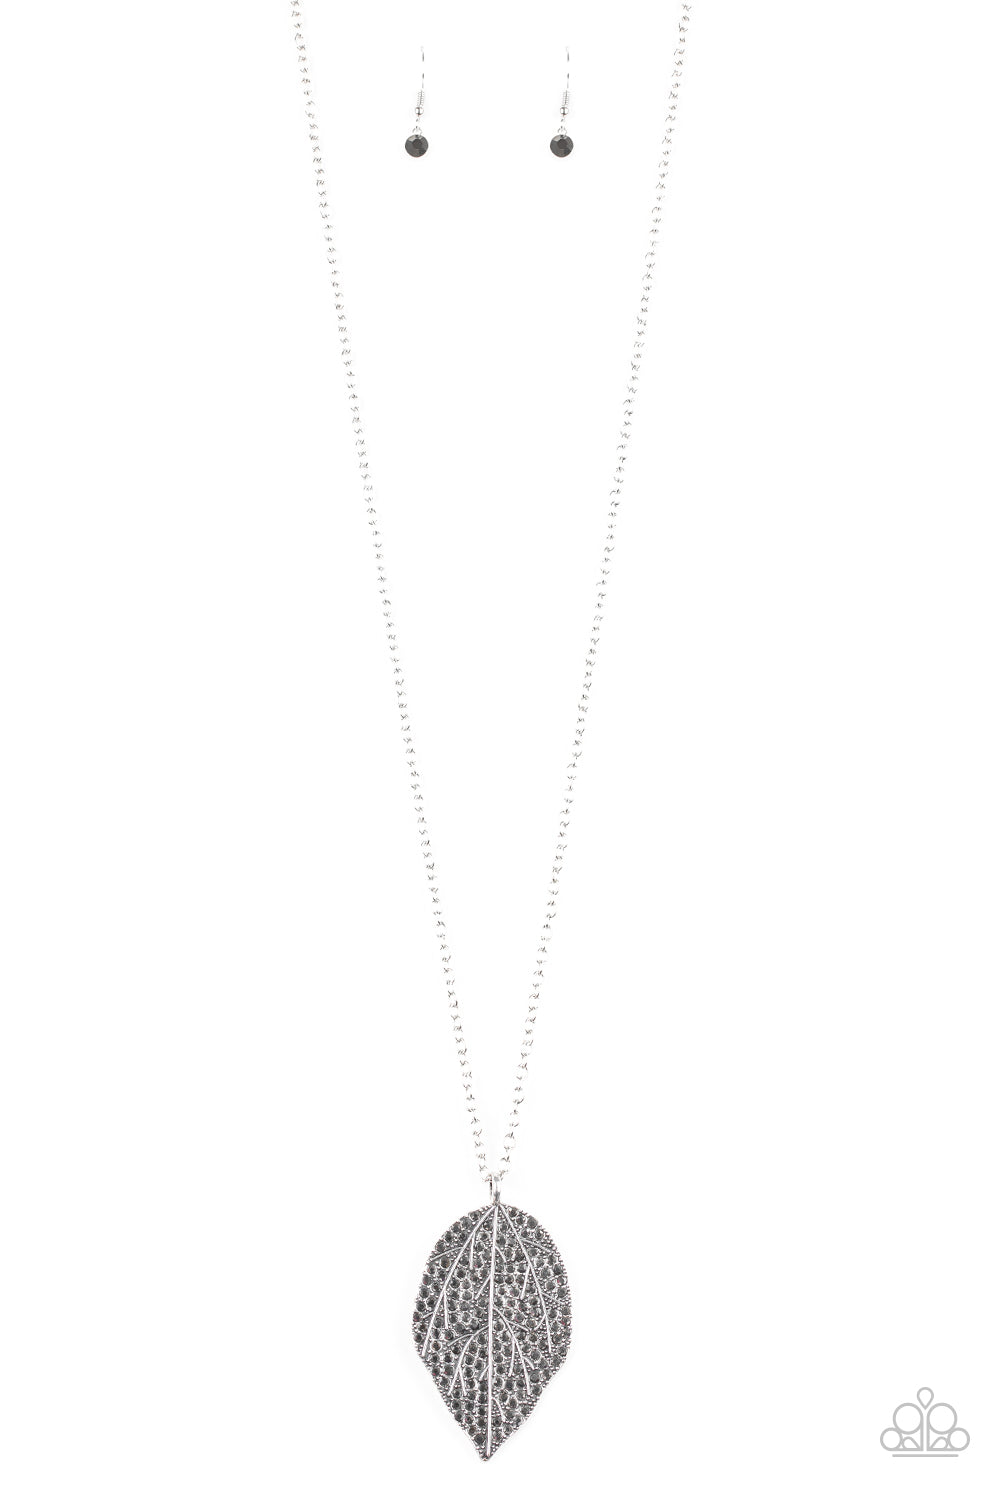 Natural Re-LEAF Silver Necklace - Paparazzi Accessories. Featuring lifelike patterns, a hematite rhinestone encrusted silver leaf swings from the bottom of a lengthened silver chain, creating an edgy pendant. Features an adjustable clasp closure.  All Paparazzi Accessories are lead free and nickel free!  Sold as one individual necklace. Includes one pair of matching earrings.